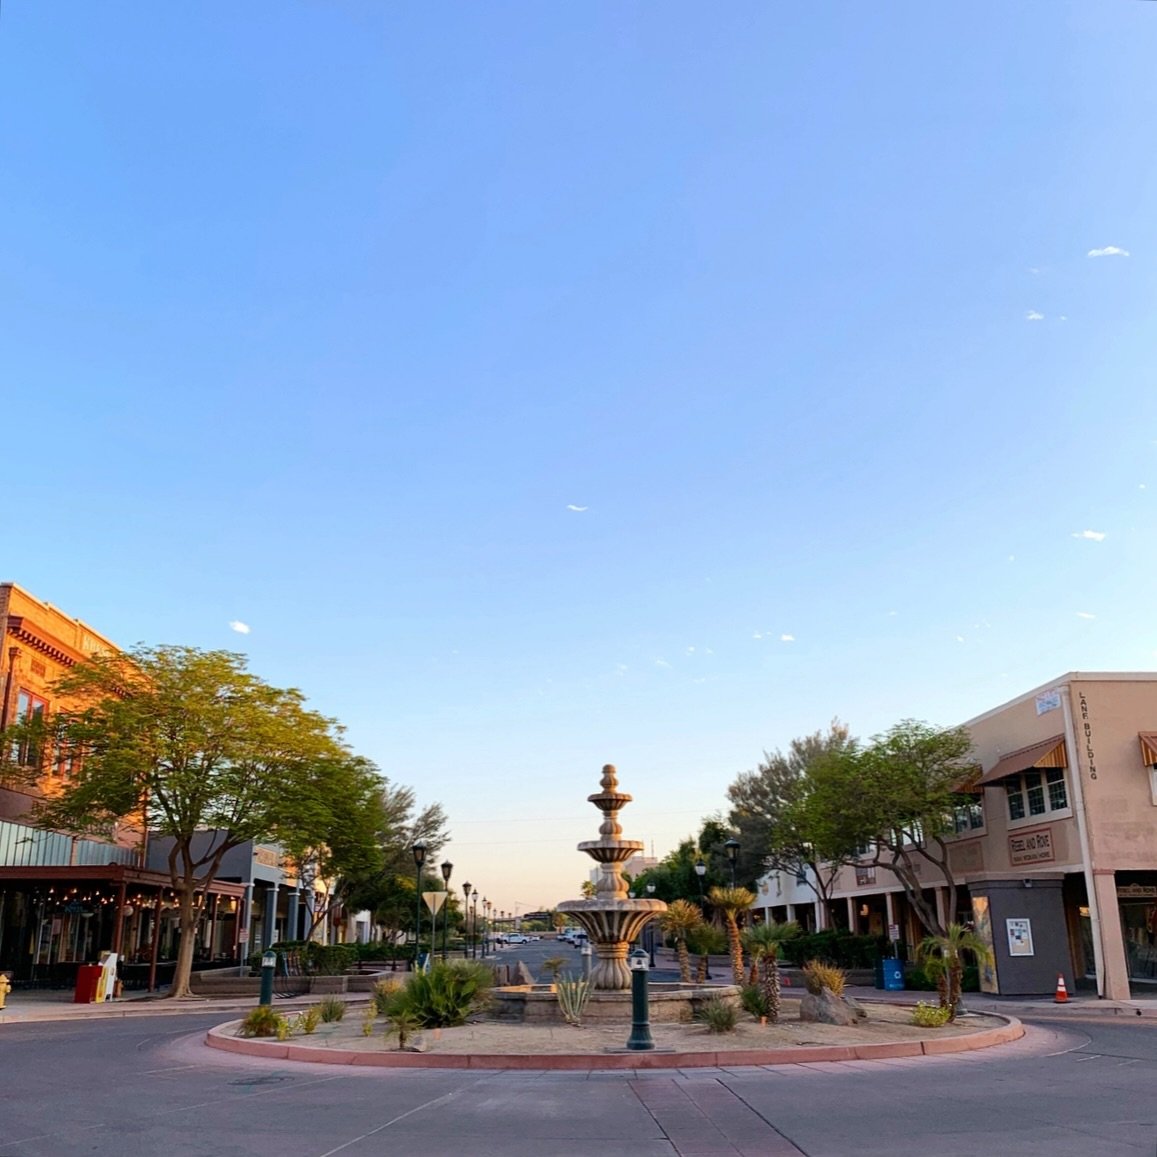 It&rsquo;s First Friday!! Head Downtown Yuma to show local businesses some💛! Many shops downtown stay open until 8 pm.

Support local businesses wherever you live! 

#lifeinthedesert #shopsmallbusinesses #mainstreet #downtownyuma #shopsmallallyear #